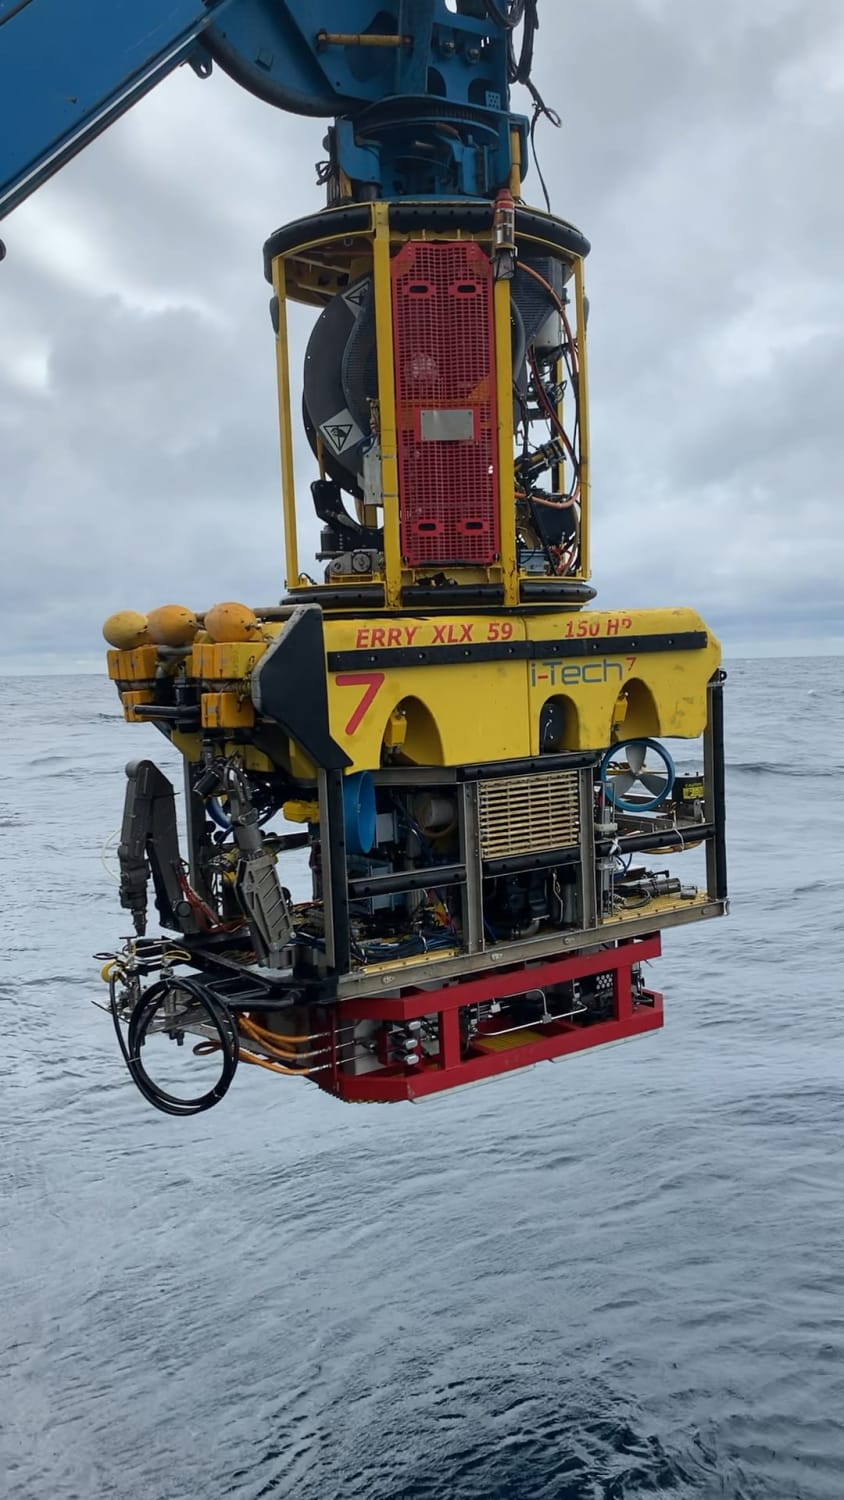 Launching a work-class ROV with pumping skid attached in the Gulf of Mexico. Calm seas.